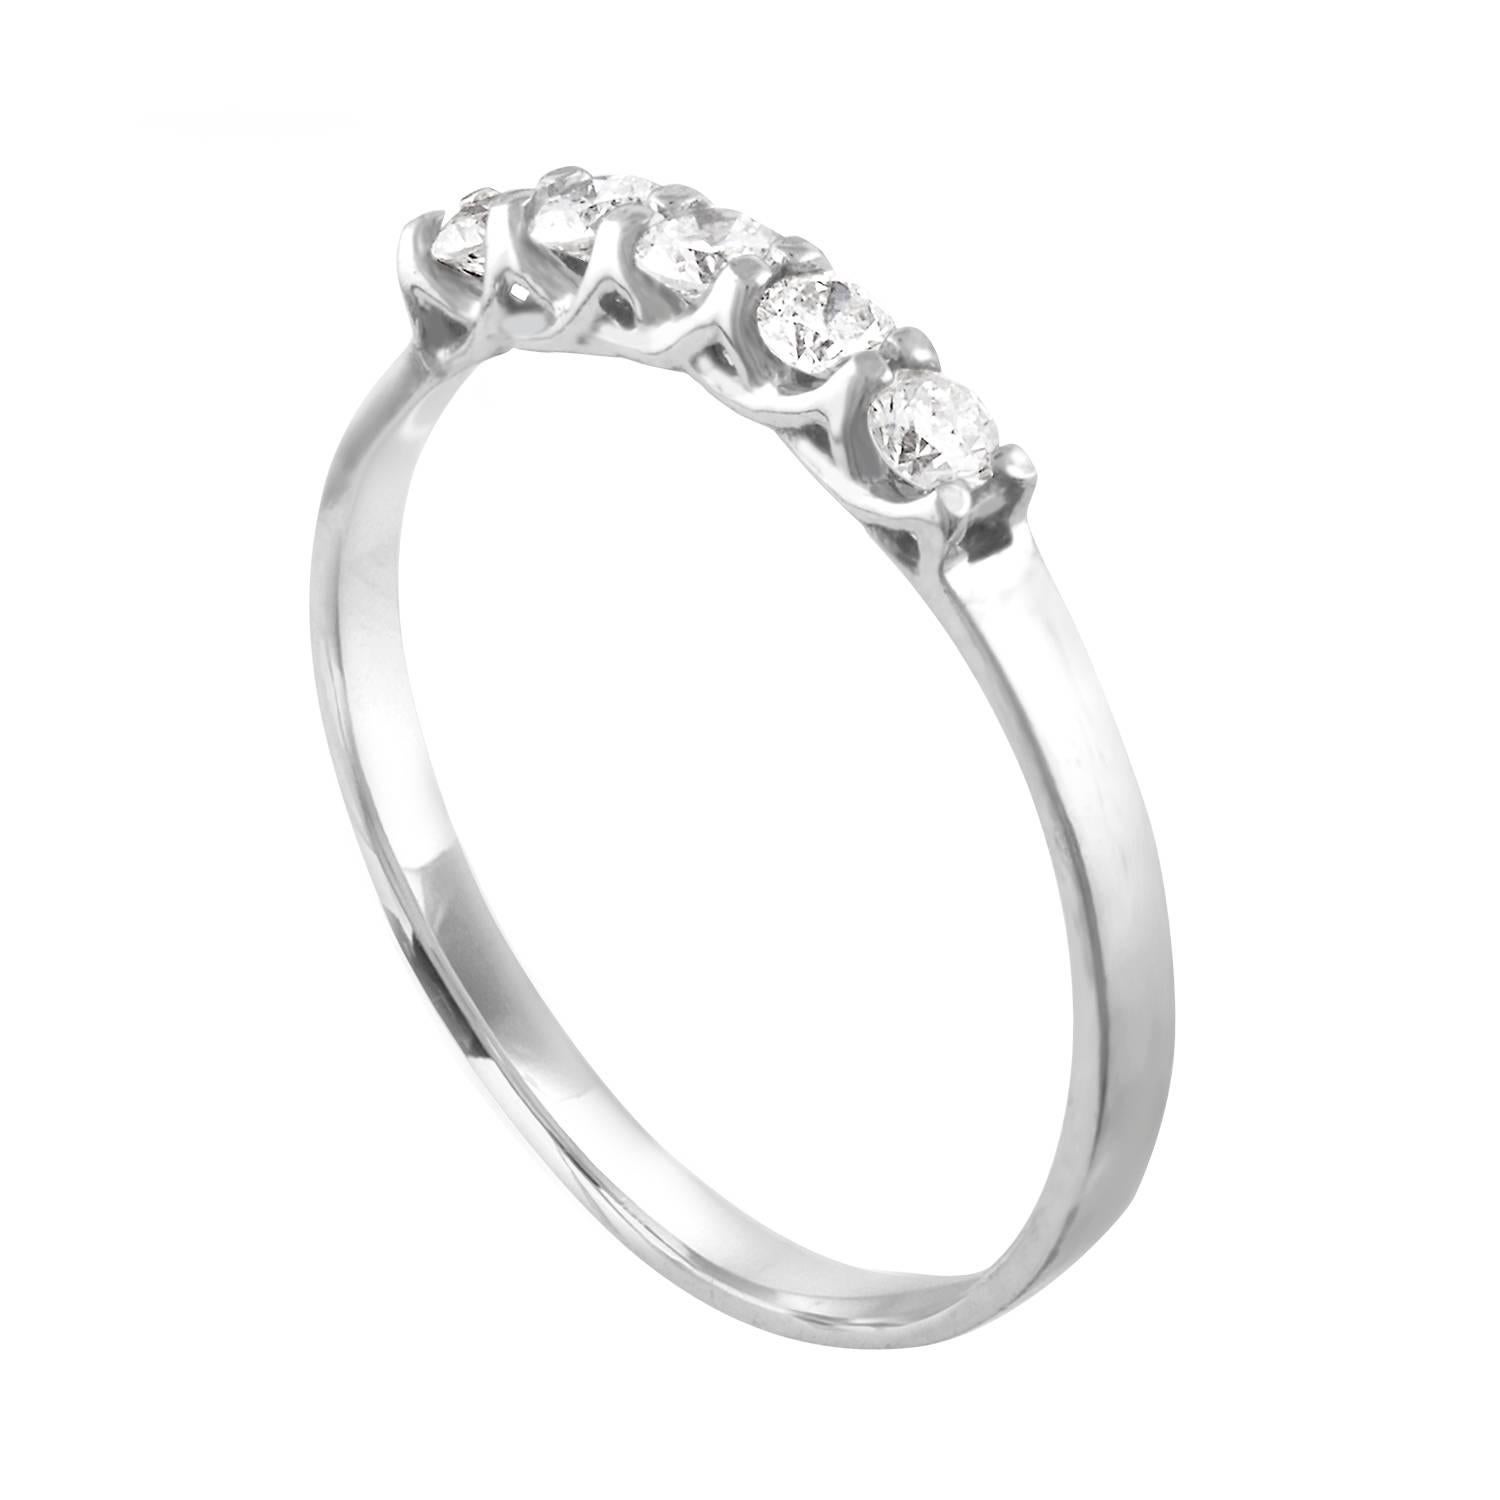 Delicate Five-Stone Ring Great For Stacking
The ring is 14K White Gold
There are 0.25 Carats in Diamonds H I3
The ring is a size 6, sizable
The ring weighs 1.2 grams